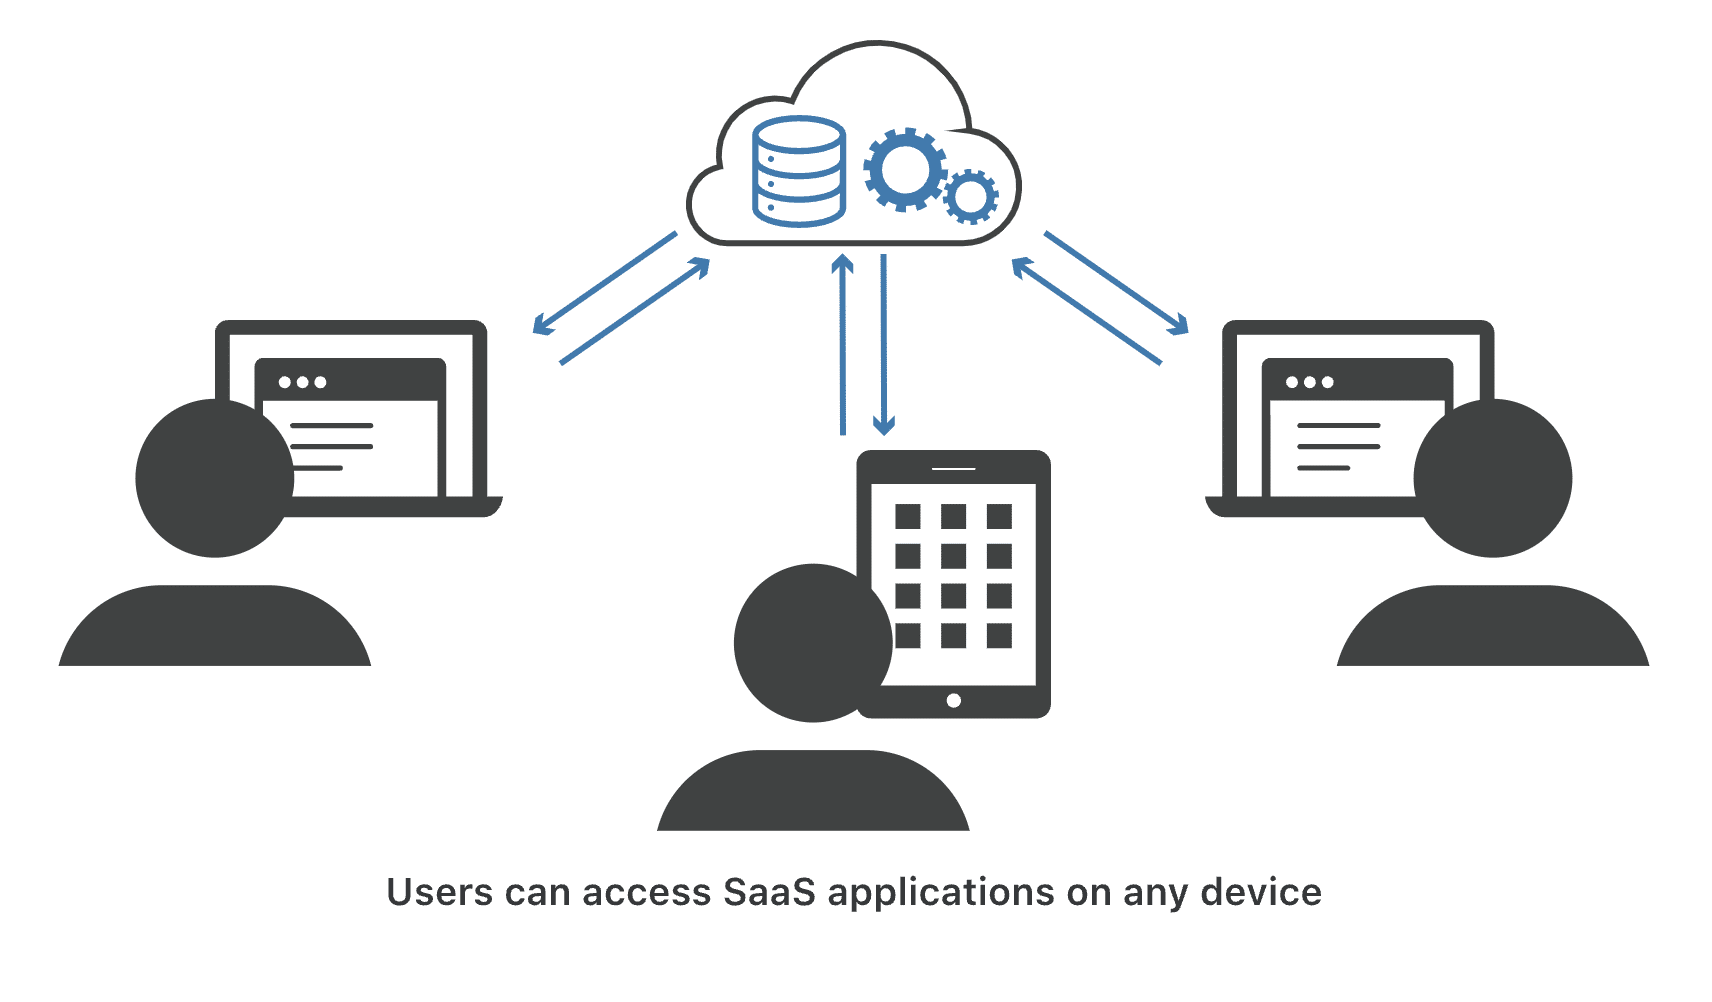 graphic shows that users can access SaaS applications on any device